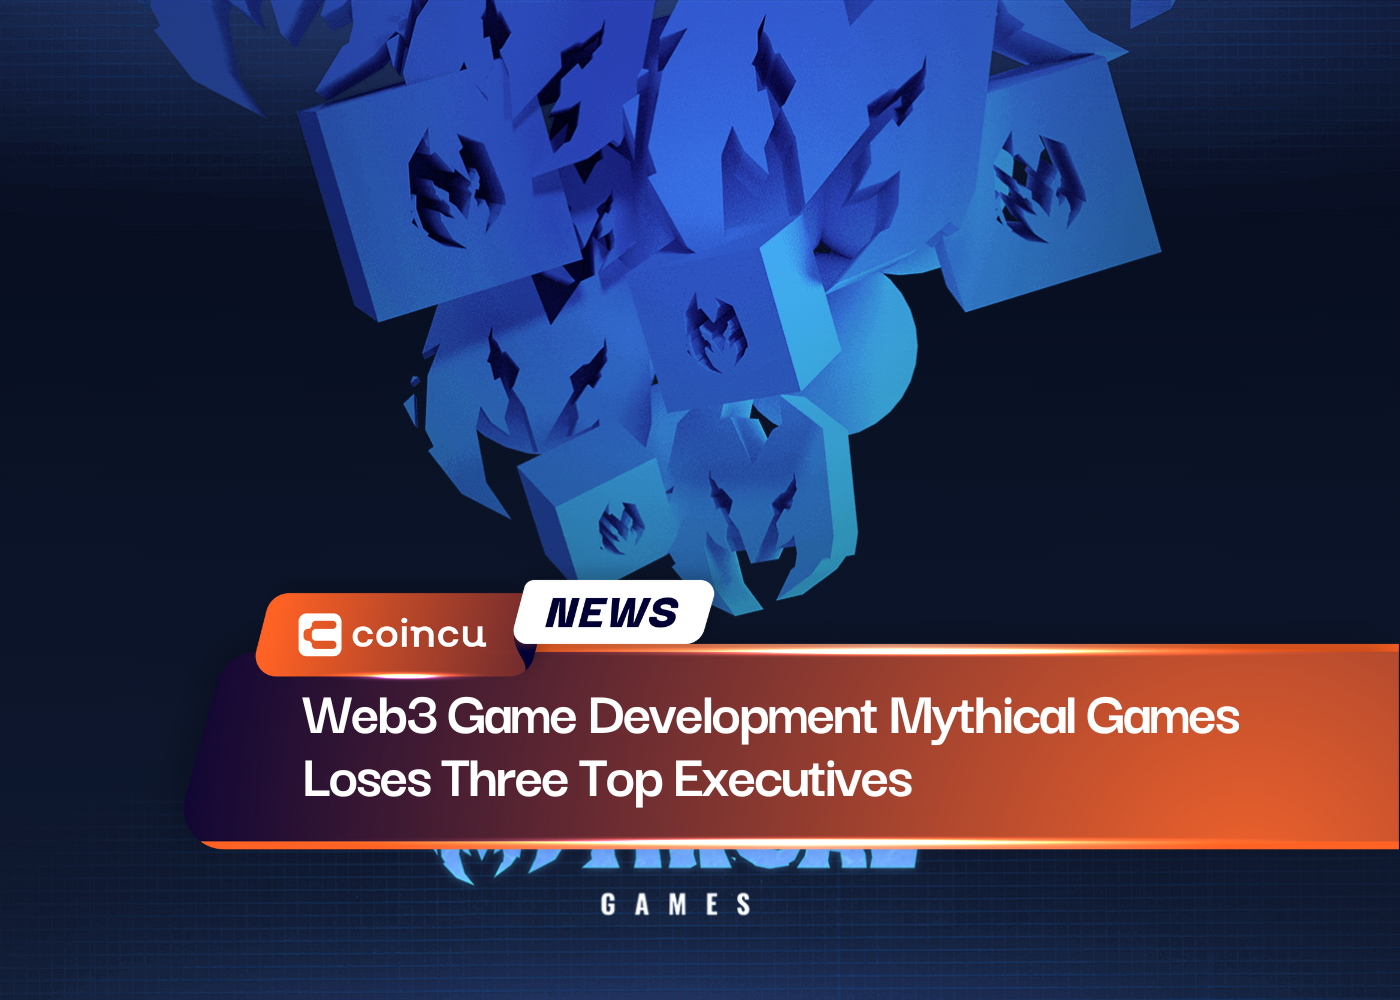 Web3 Game Development Mythical Games Loses Three Top Executives